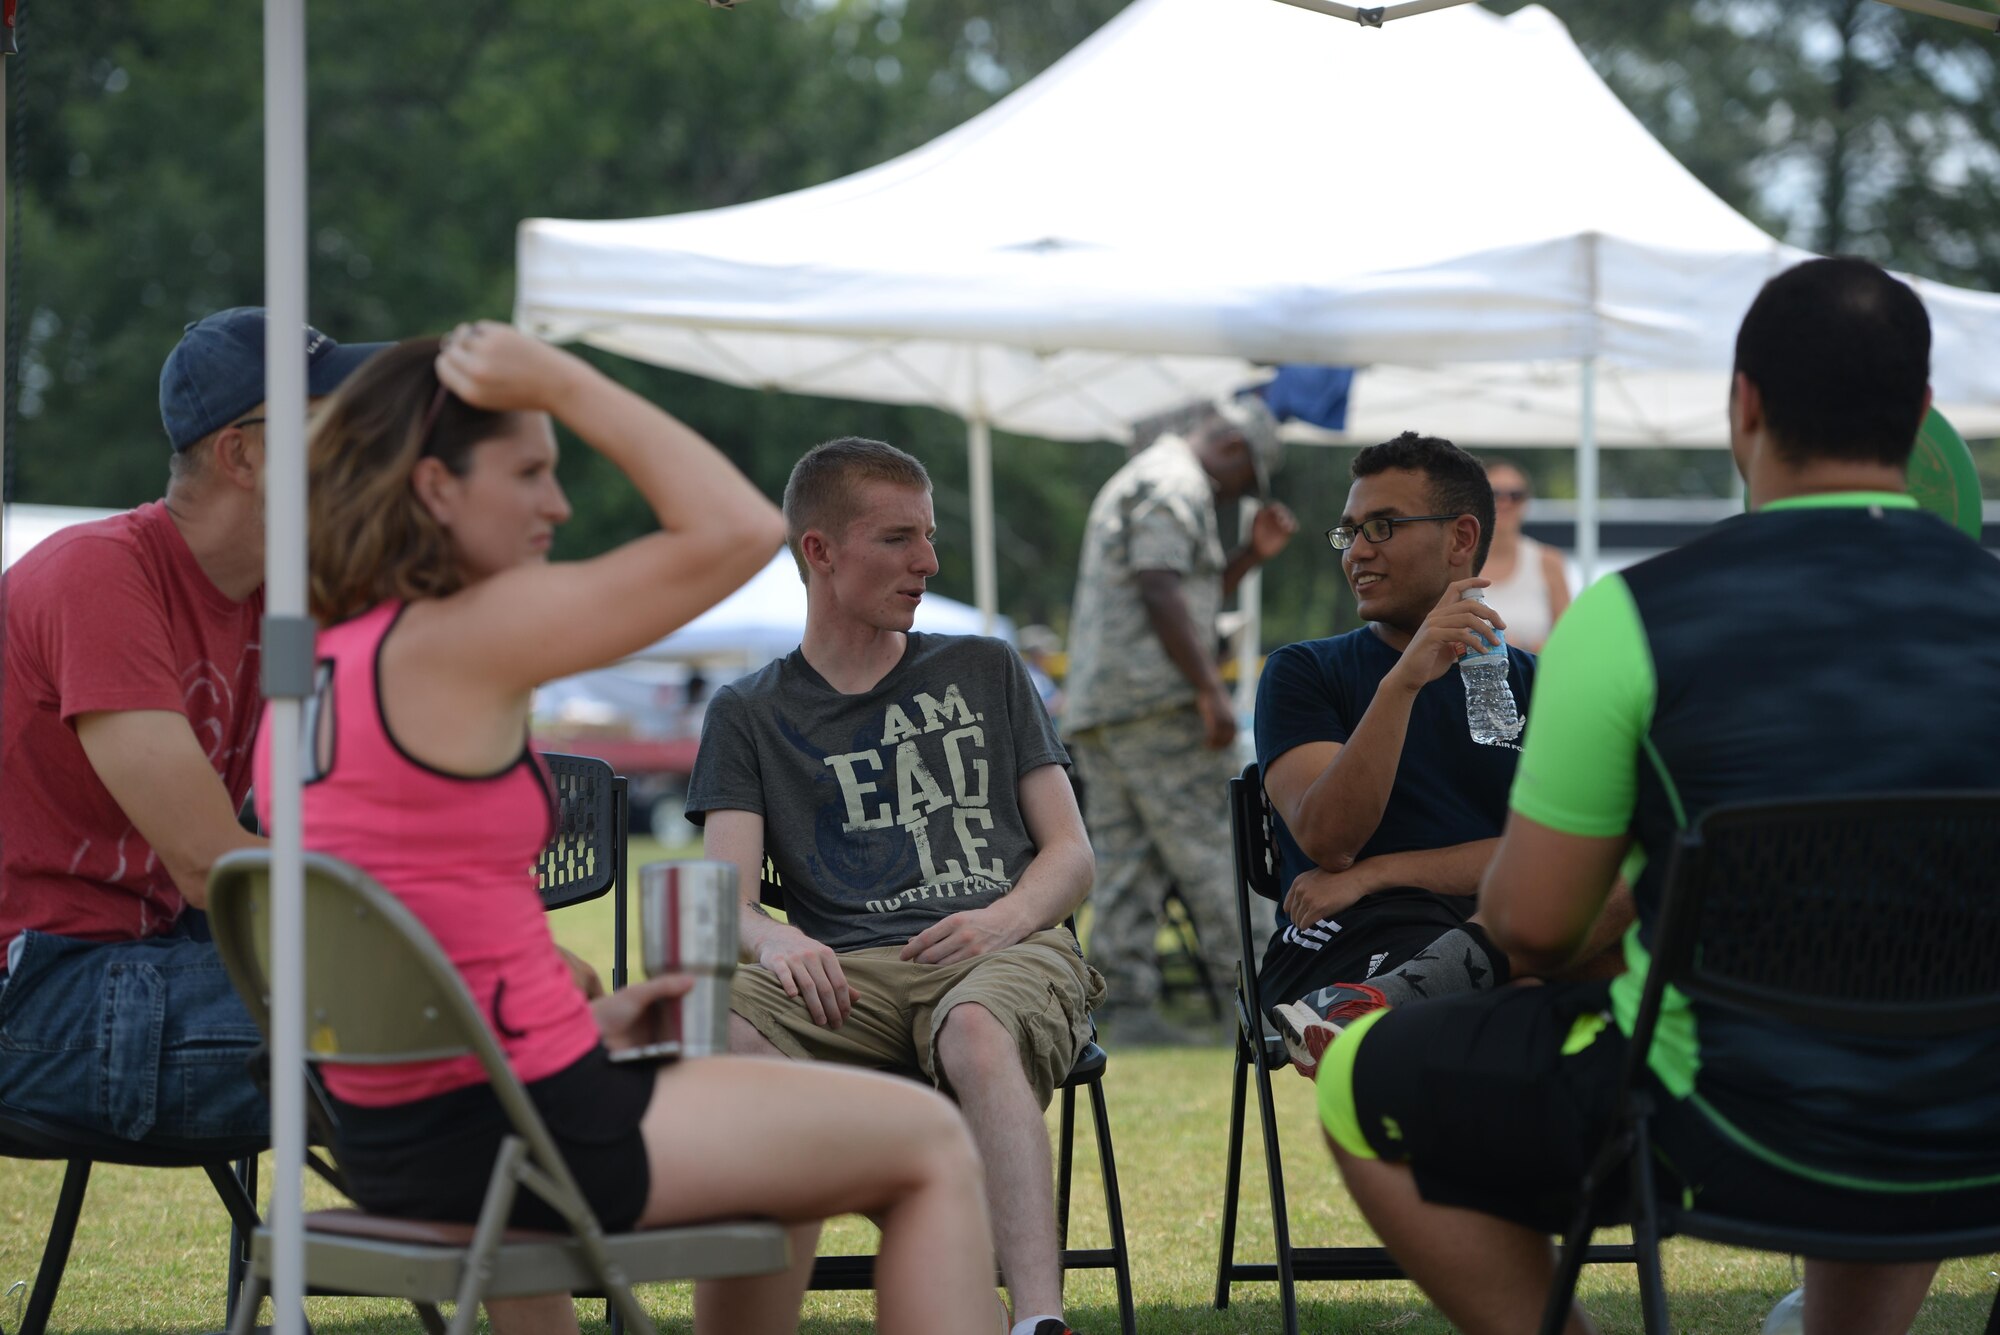 A group Airmen gather at the End of Summer Aug. 4, 2017, on Columbus Air Force Base, Mississippi. A large group of base members gathered at the End of Summer Bash to socialize, play games and have fun. (U.S. Air Force photo by Airman 1st Class Keith Holcomb)